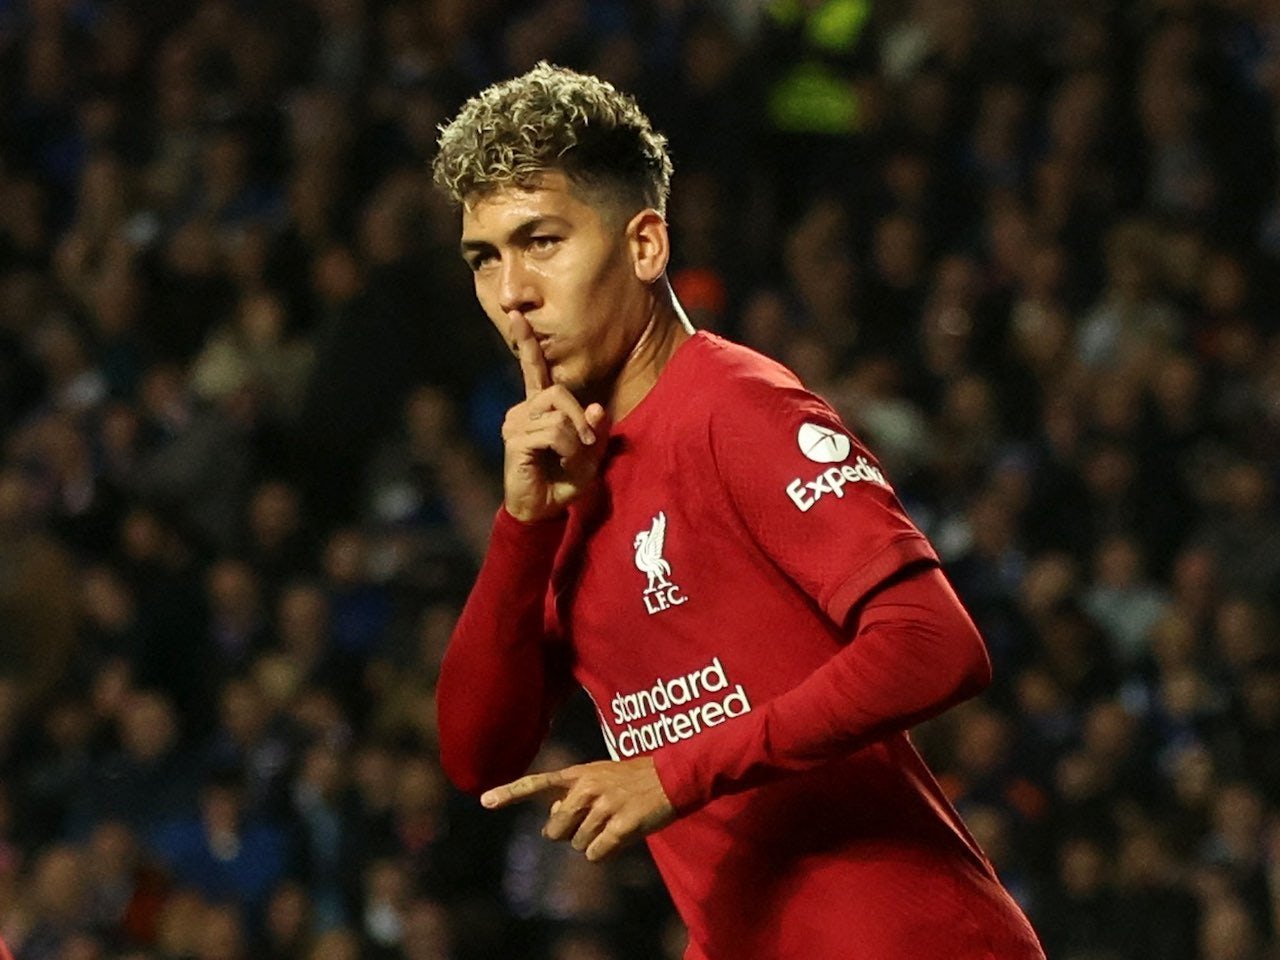 Barcelona have rejected an offer to sign Roberto Firmino next season